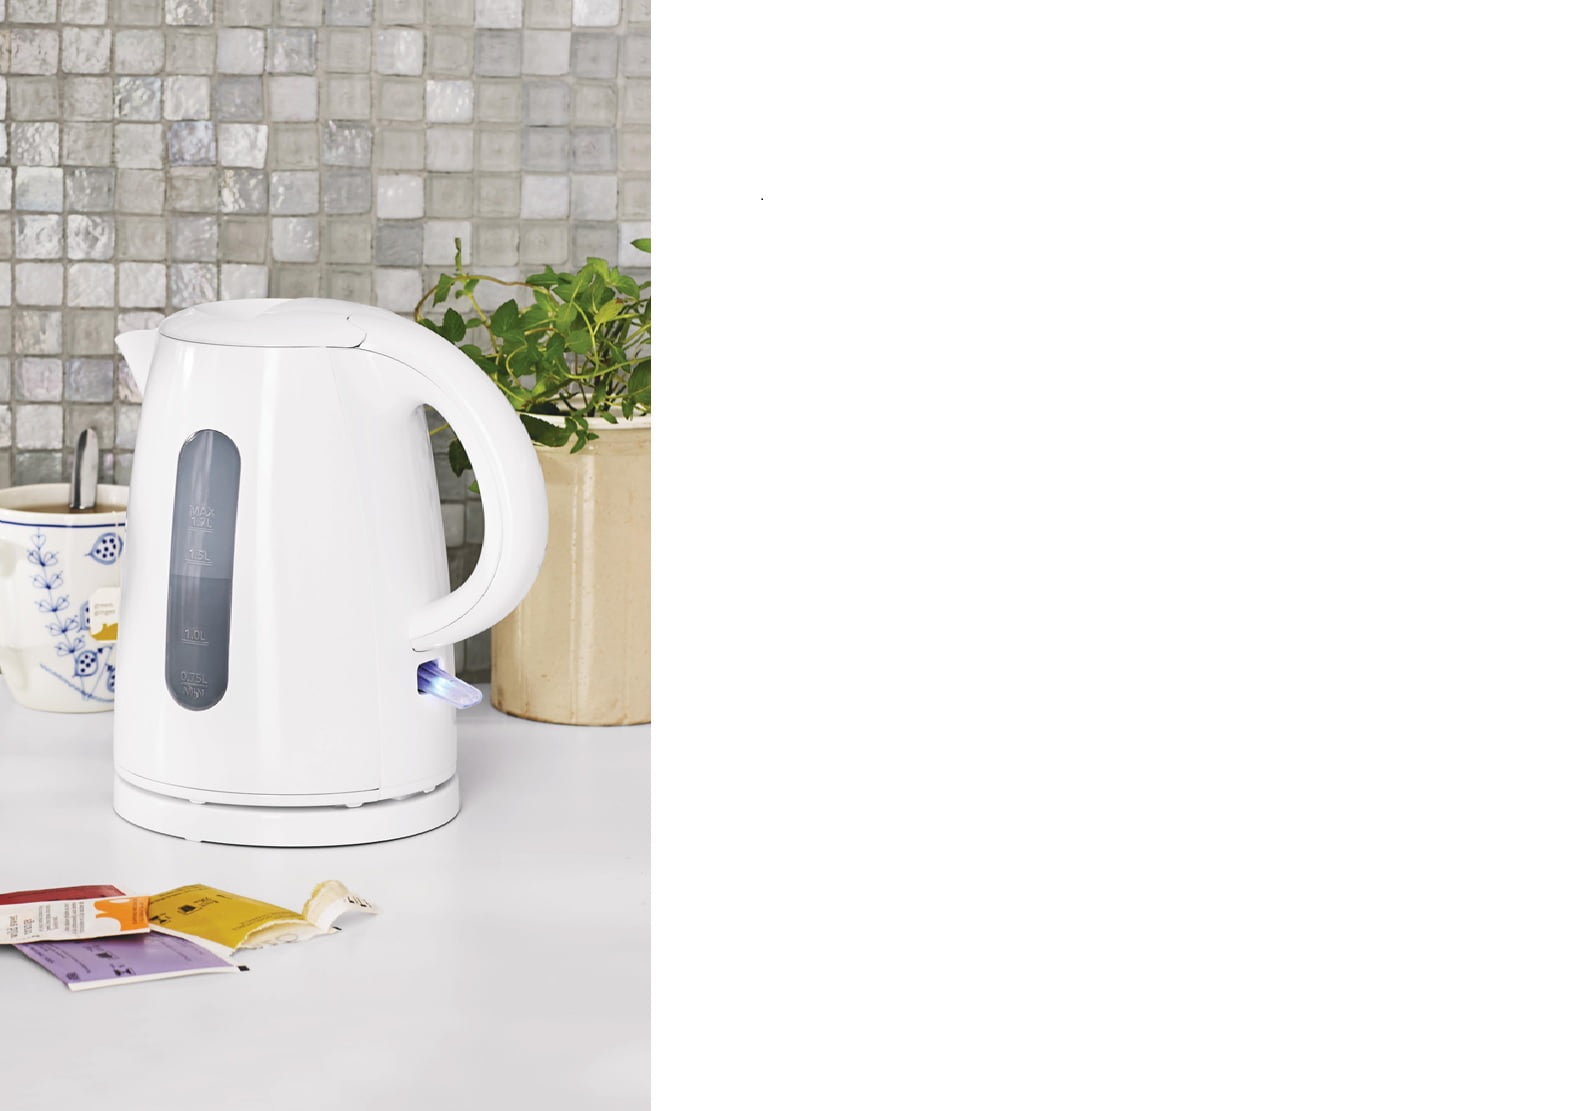 Proctor Silex 7 Cups 1.7-Liter Plastic Cordless Electric Kettle in White  985120360M - The Home Depot